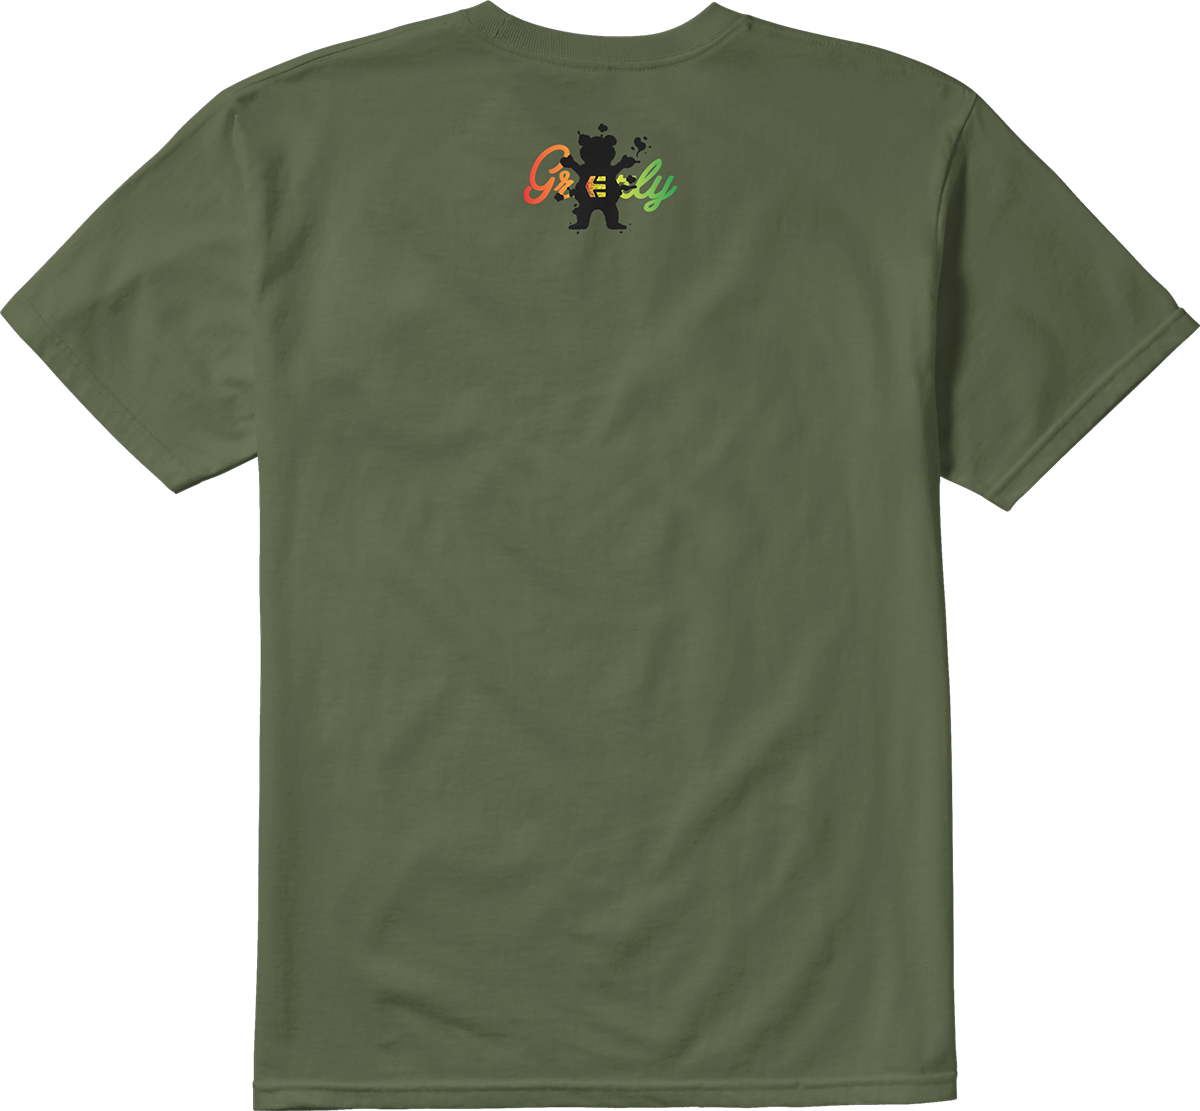 GRIZZLY ECORP TEE